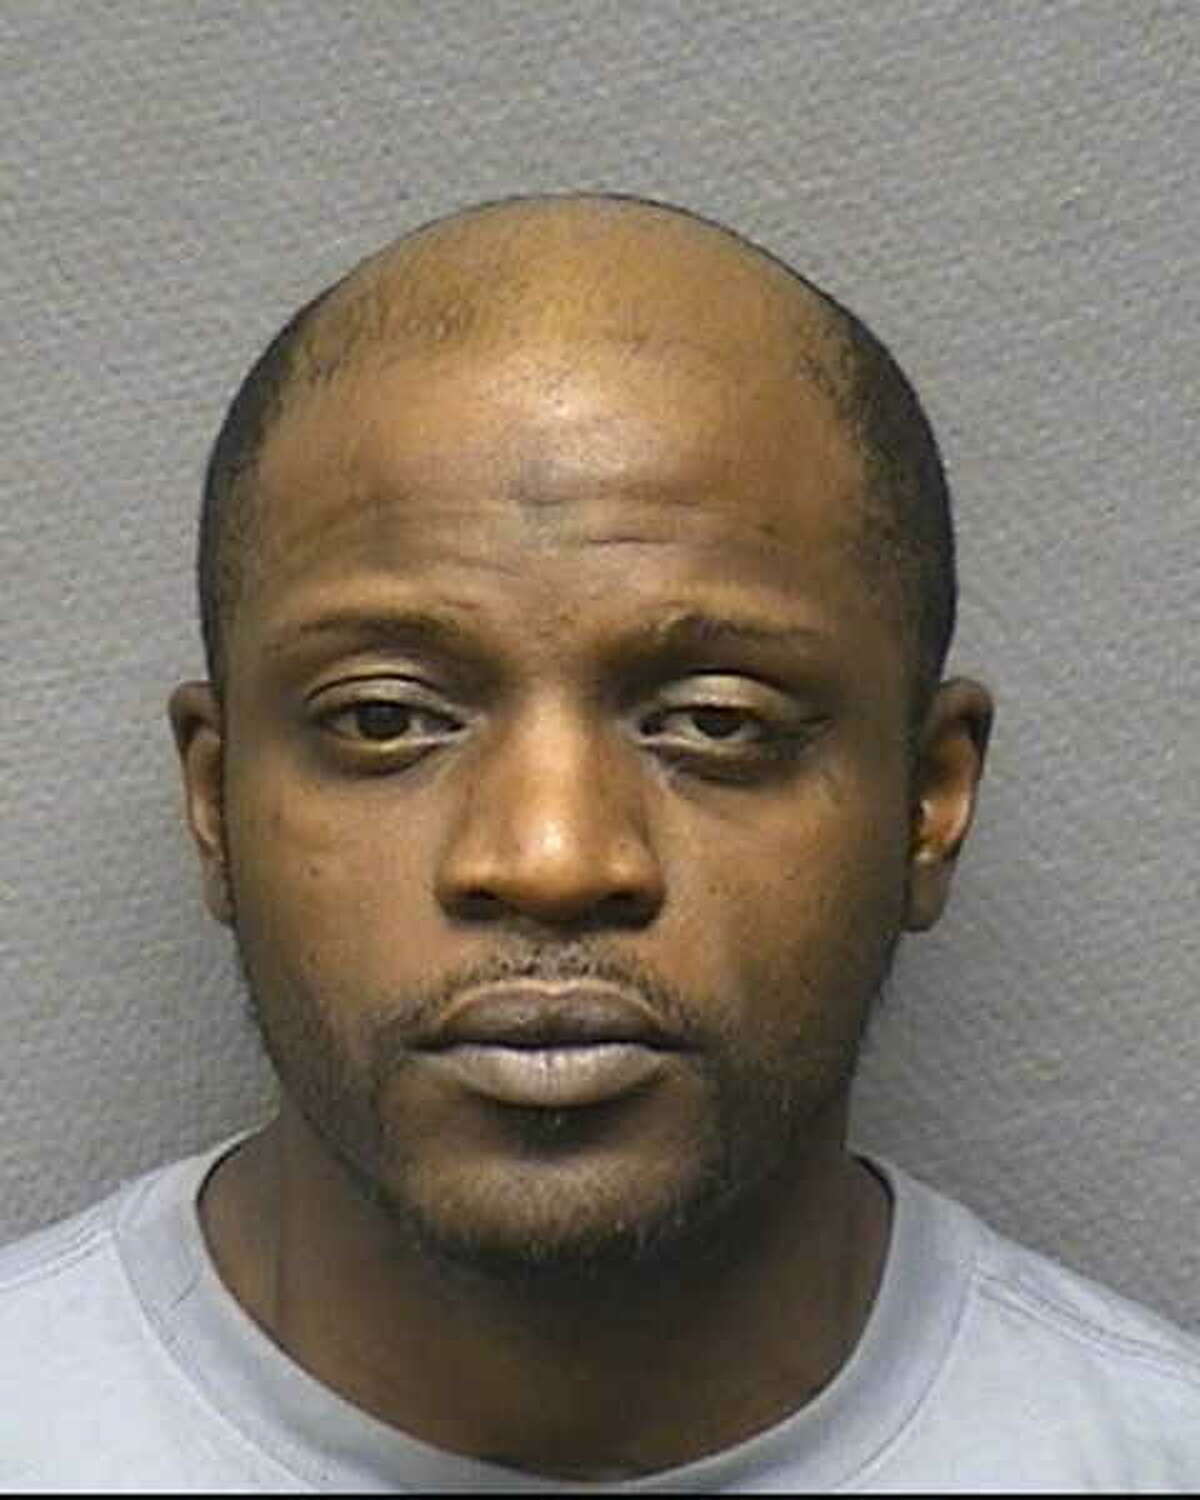 Domeka Turner has been convicted of rape and felony burglary. He is one of the assailants who went on to commit more crimes even after authorities had his DNA because of untested rape kits. Turner has previous convictions dating to 2004 for trespassing, burglary of habitation, theft, and failure to identify to a police officer, court records show.